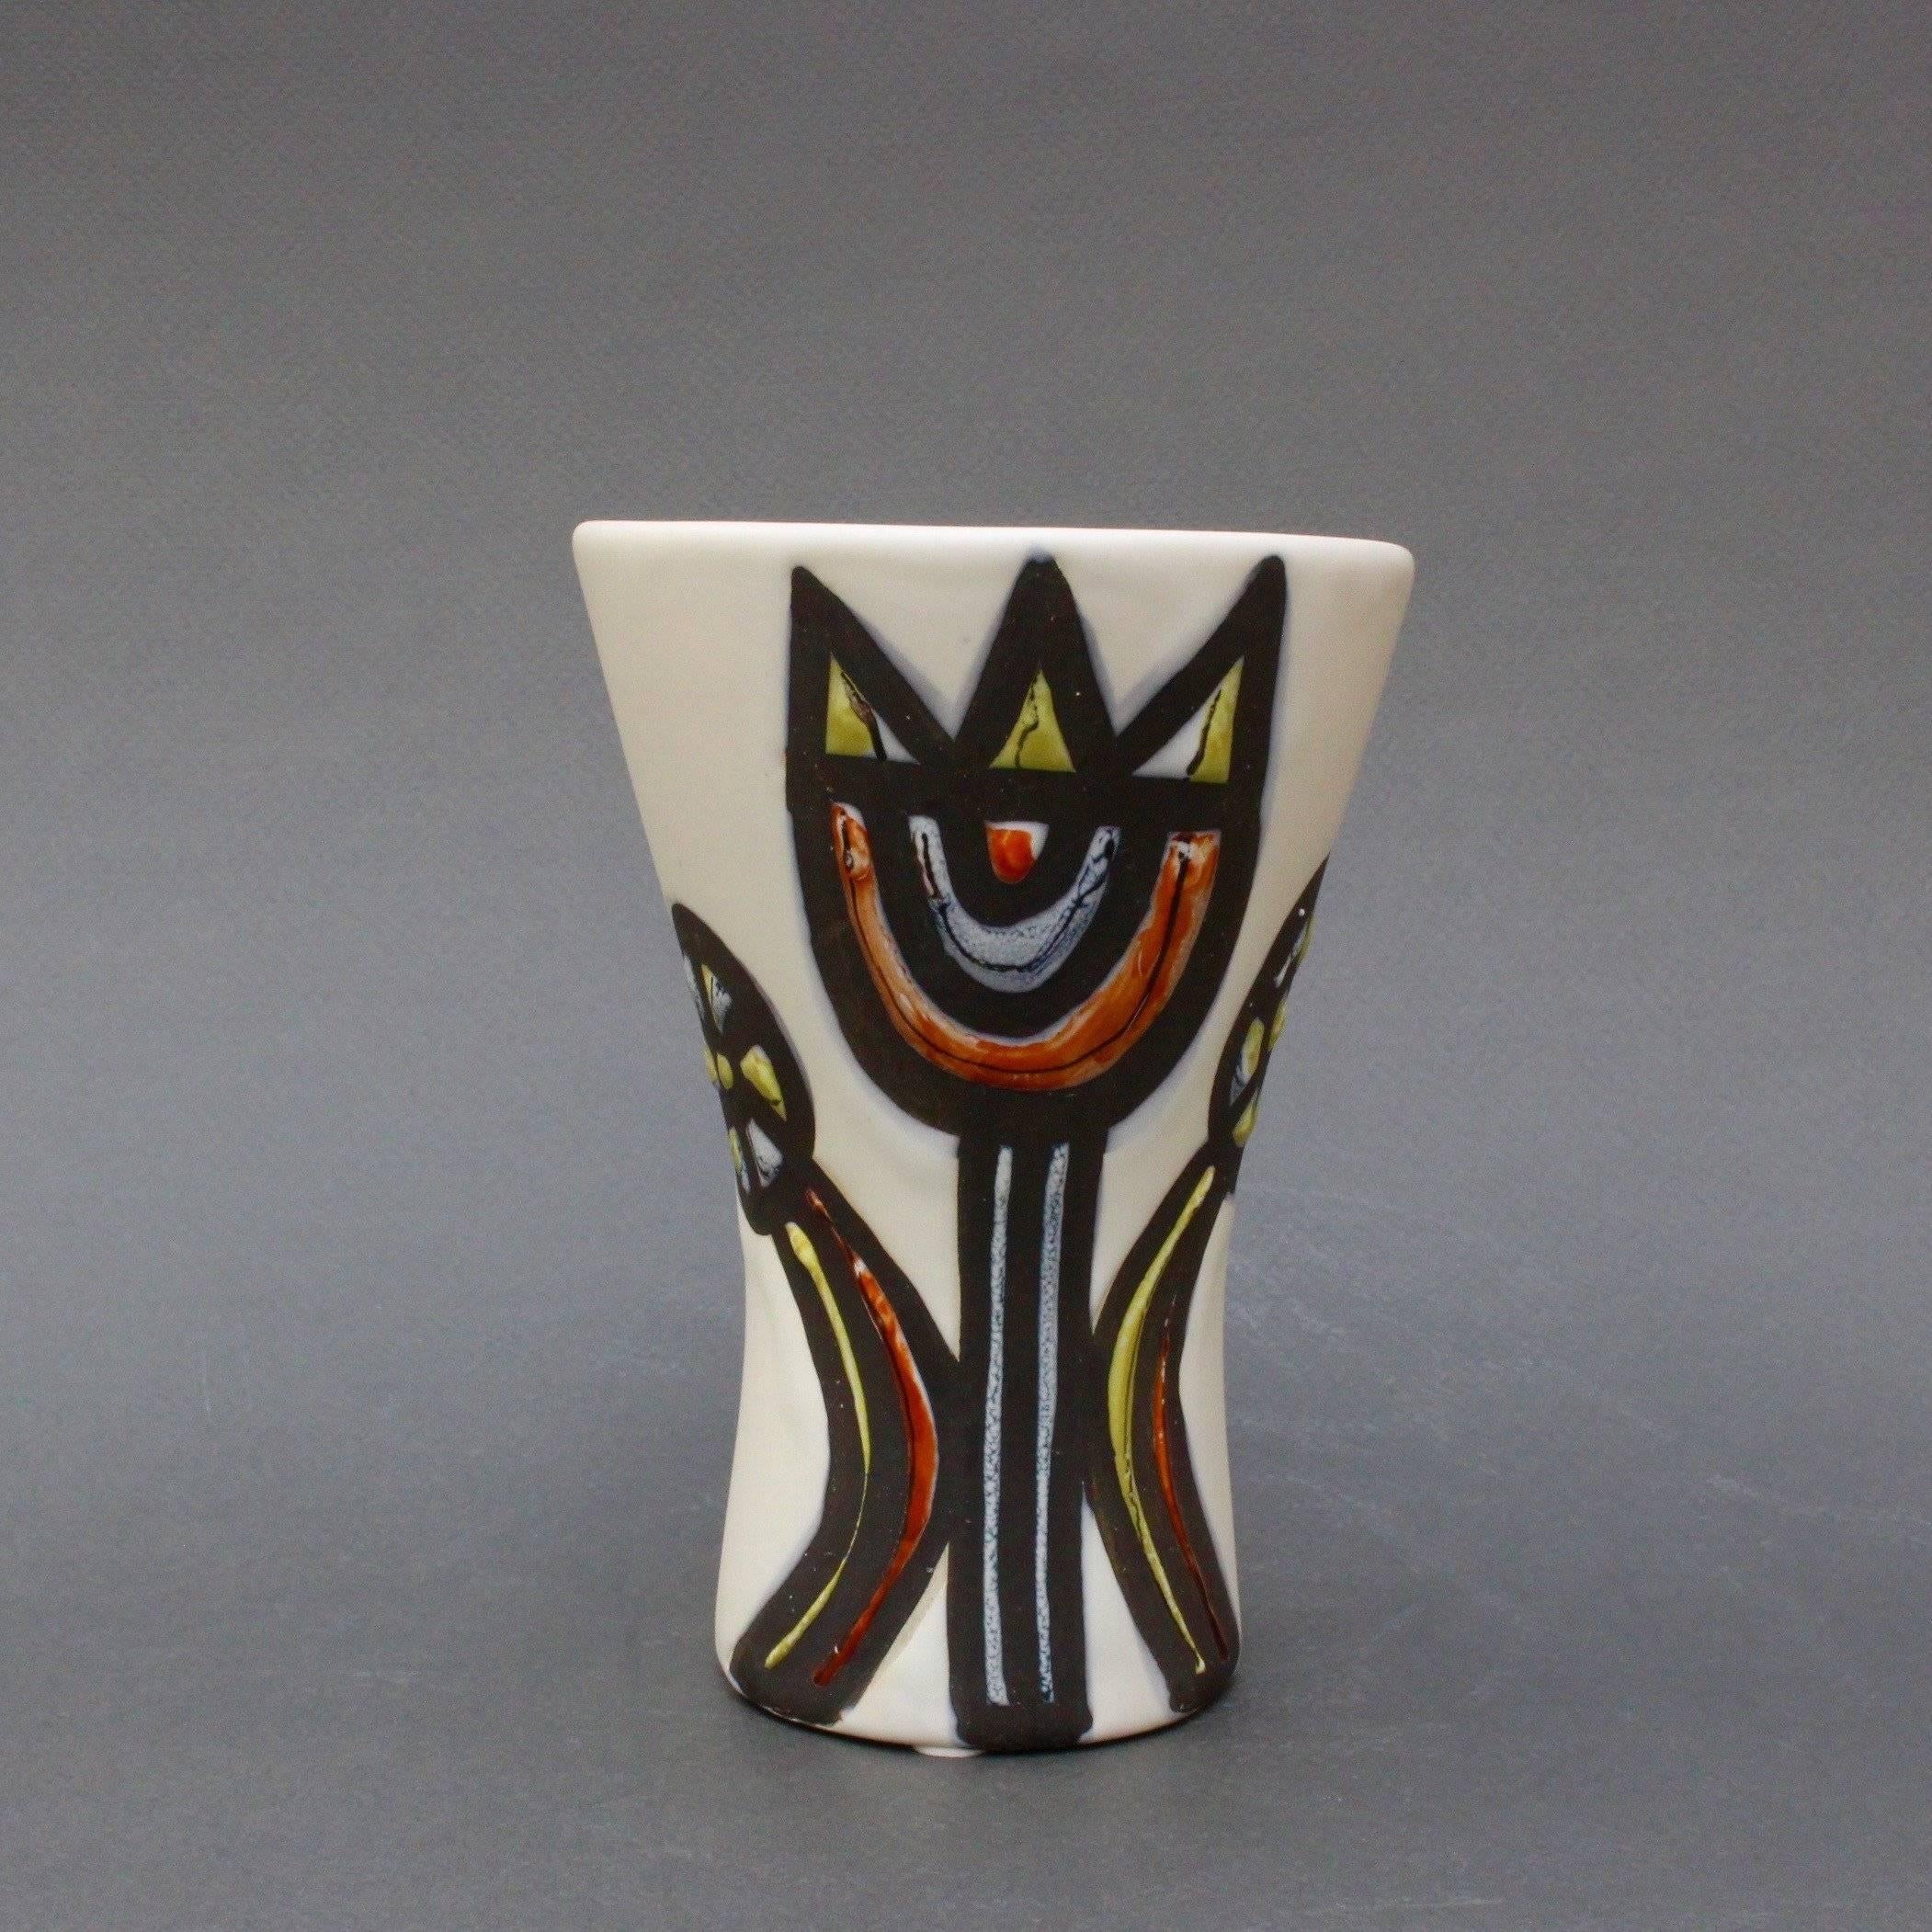 A gorgeous vase with tulips (1950s) by ceramicist Roger Capron (1922 - 2006) who founded the craft-based workshop in Vallauris, France, l'Atelier Callis, where his creations contributed to a veritable renaissance of pottery and ceramics. Capron left